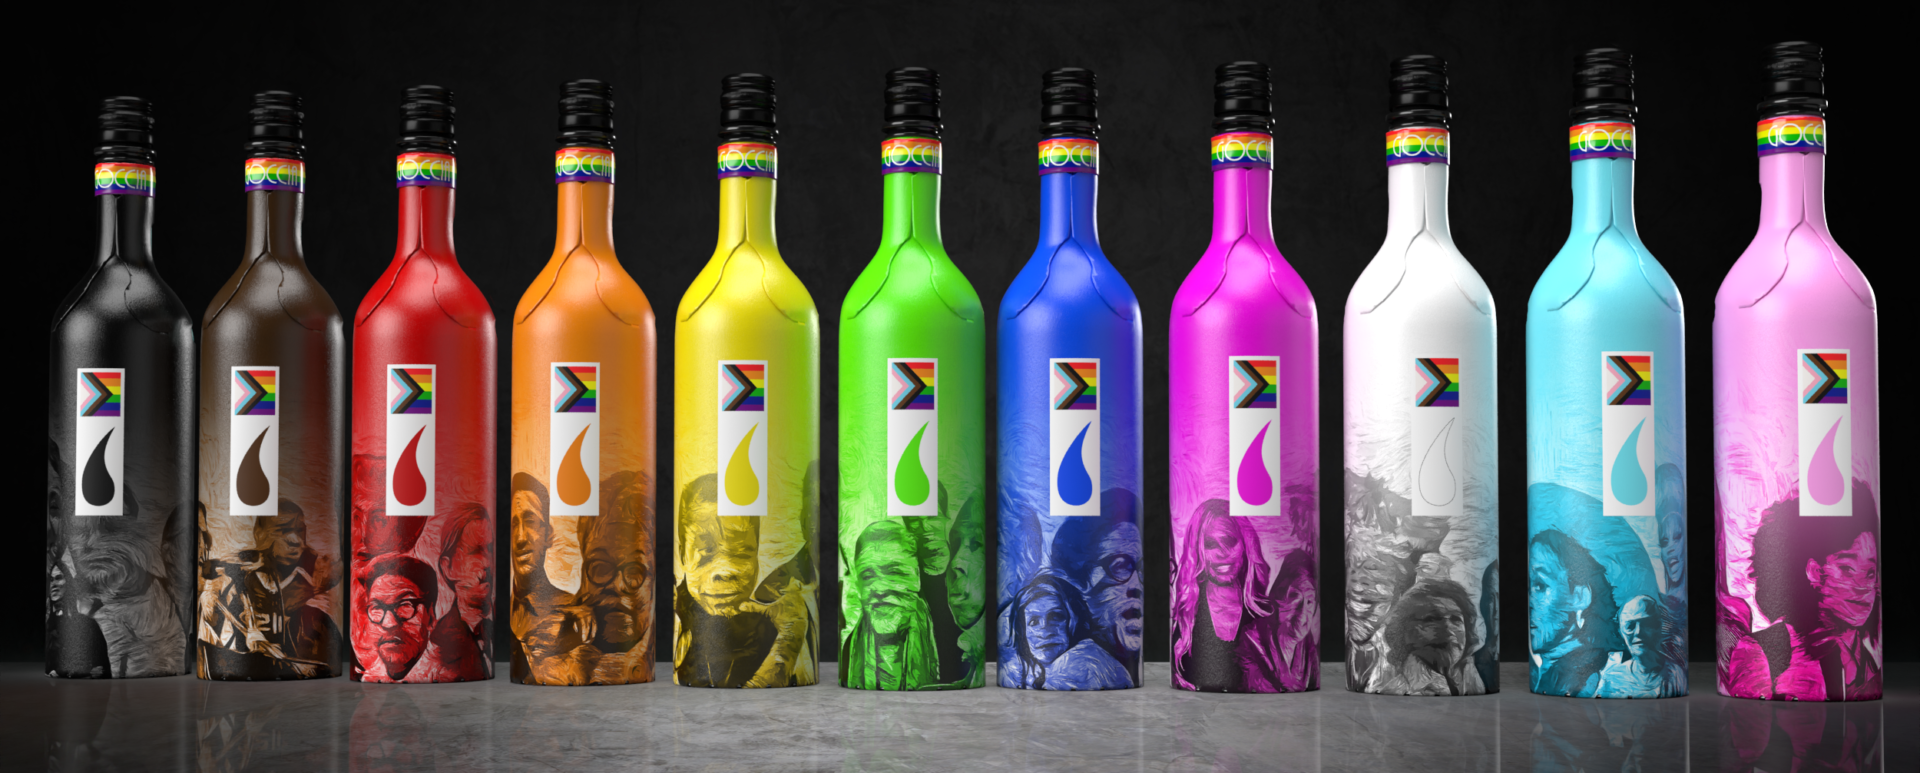 Italian Winery Cantina Goccia releases exclusive limited edition bottle collection to support LGBT+ Community